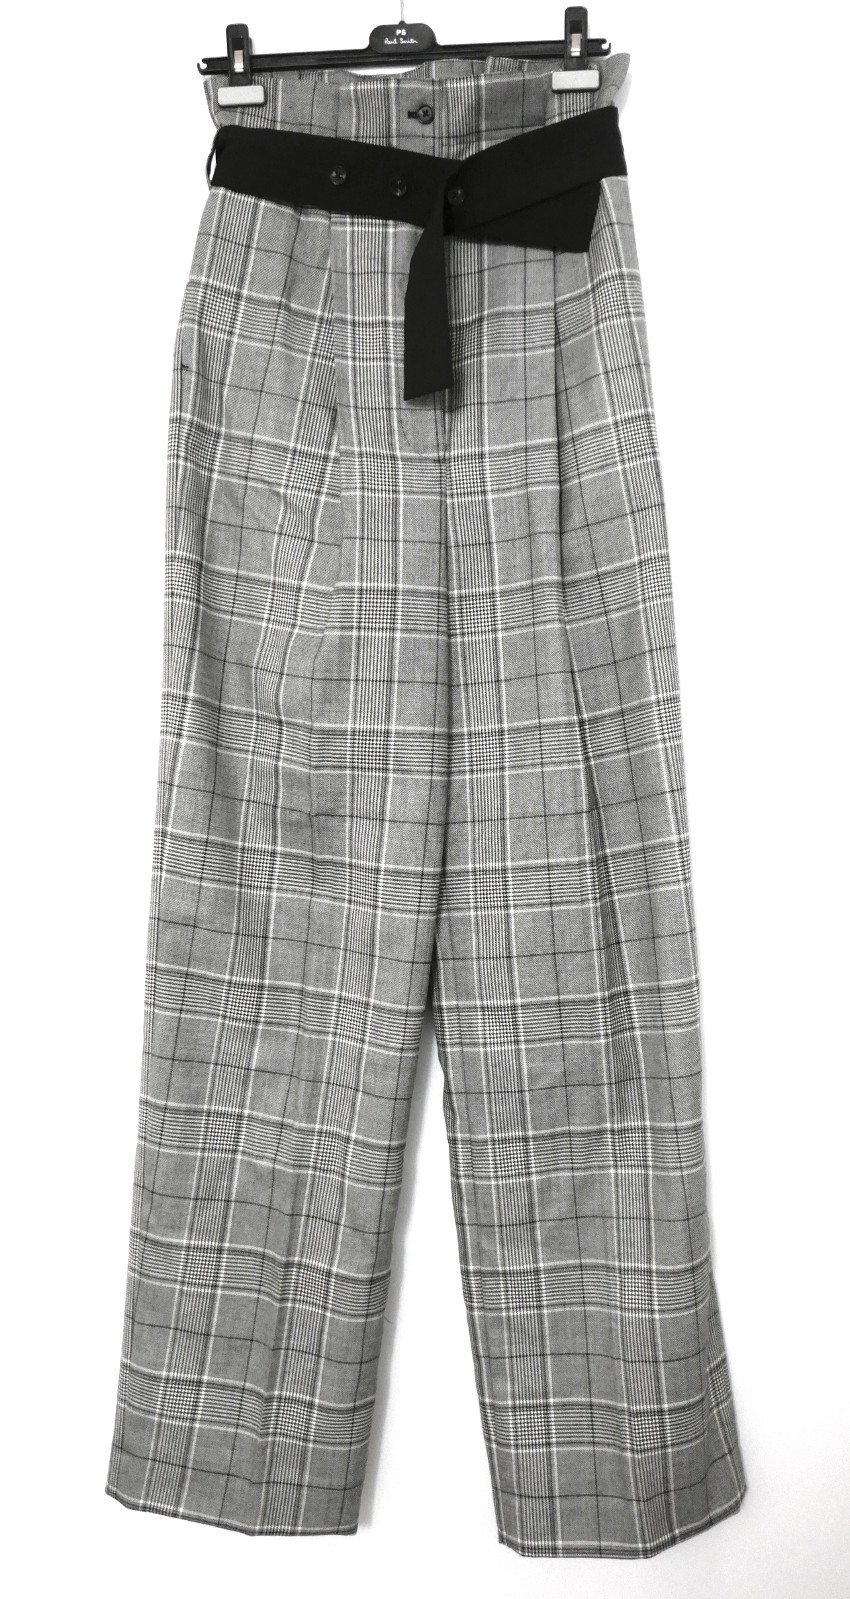 Paul Smith grey checked wool blend trousers